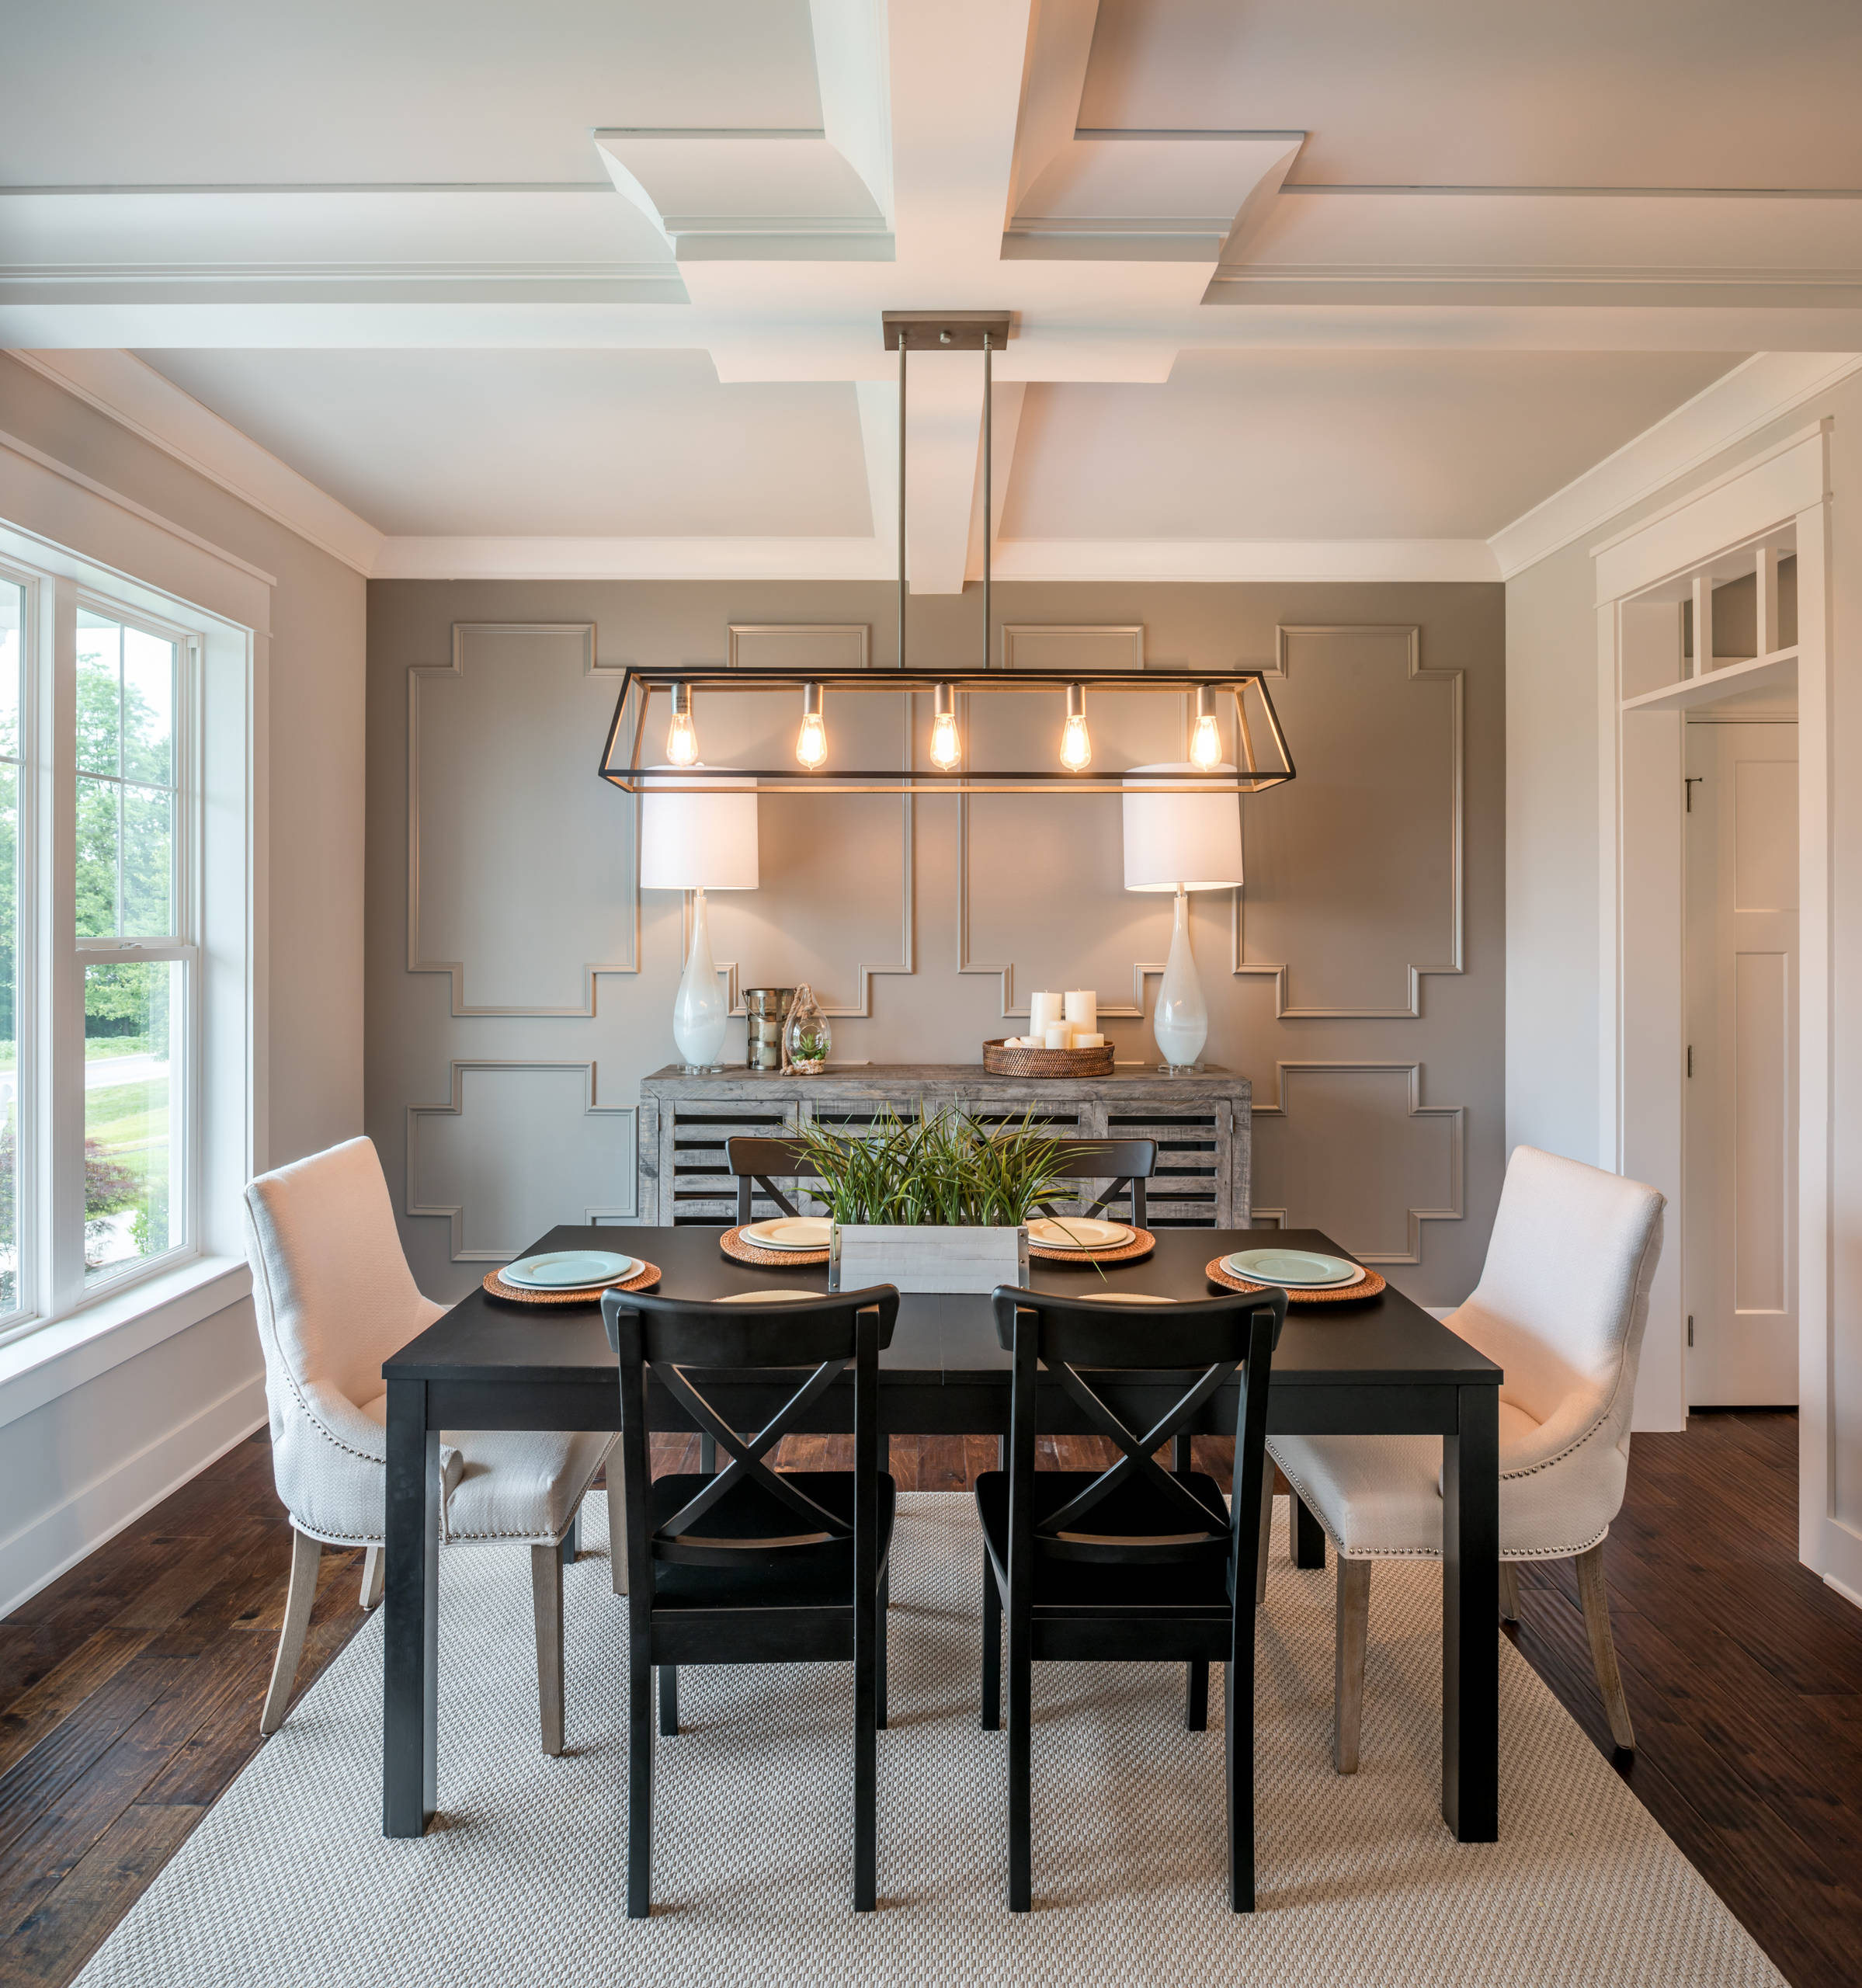 75 Beautiful Farmhouse Dining Room Pictures Ideas March 2021 Houzz Farmhouse style decor is hot today. 75 beautiful farmhouse dining room